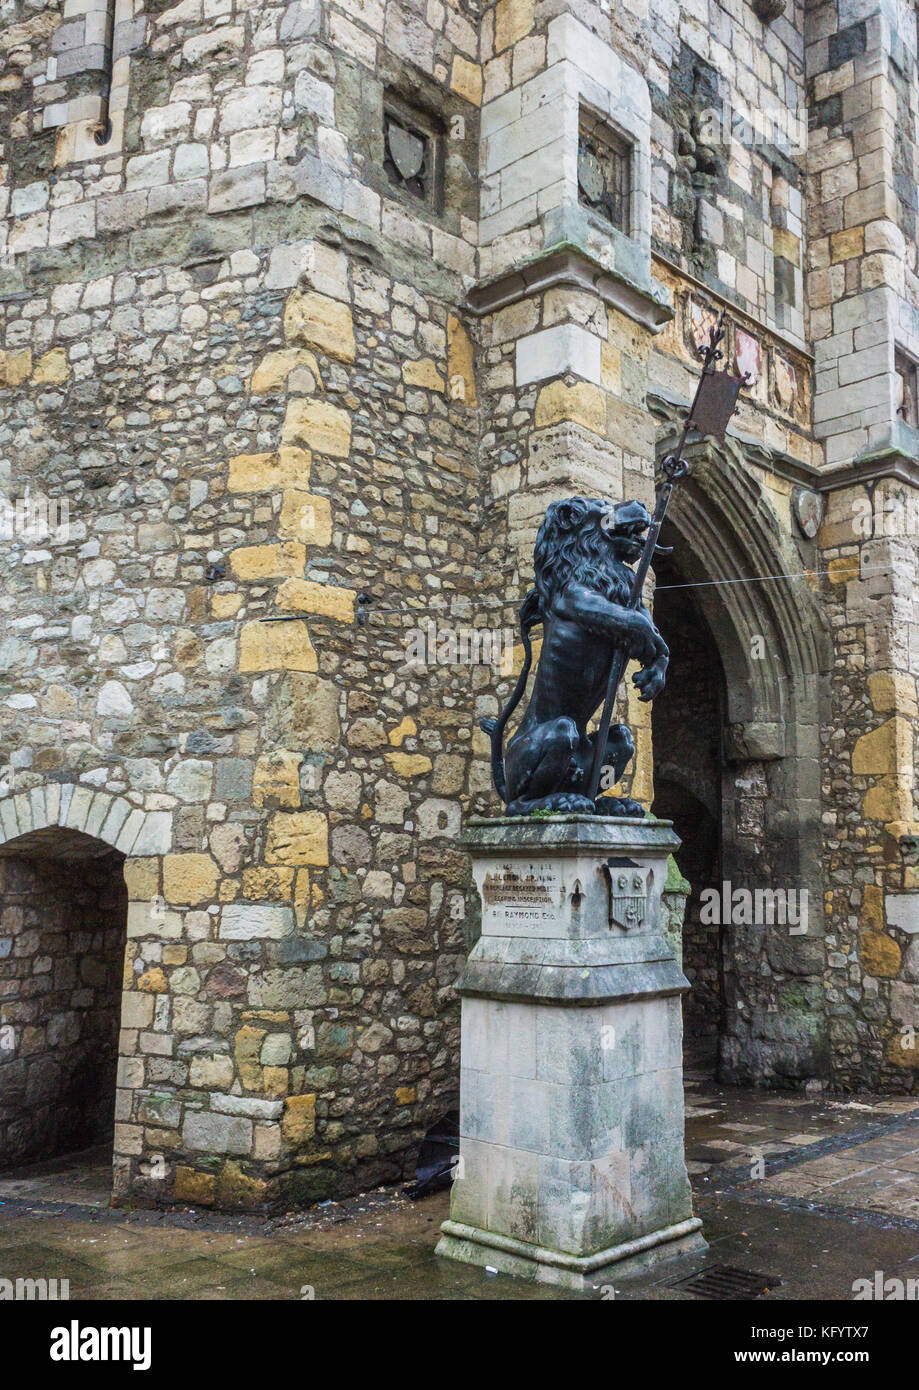 A view of one of the lions that guard the entrance to Southampton Bargate. Stock Photo